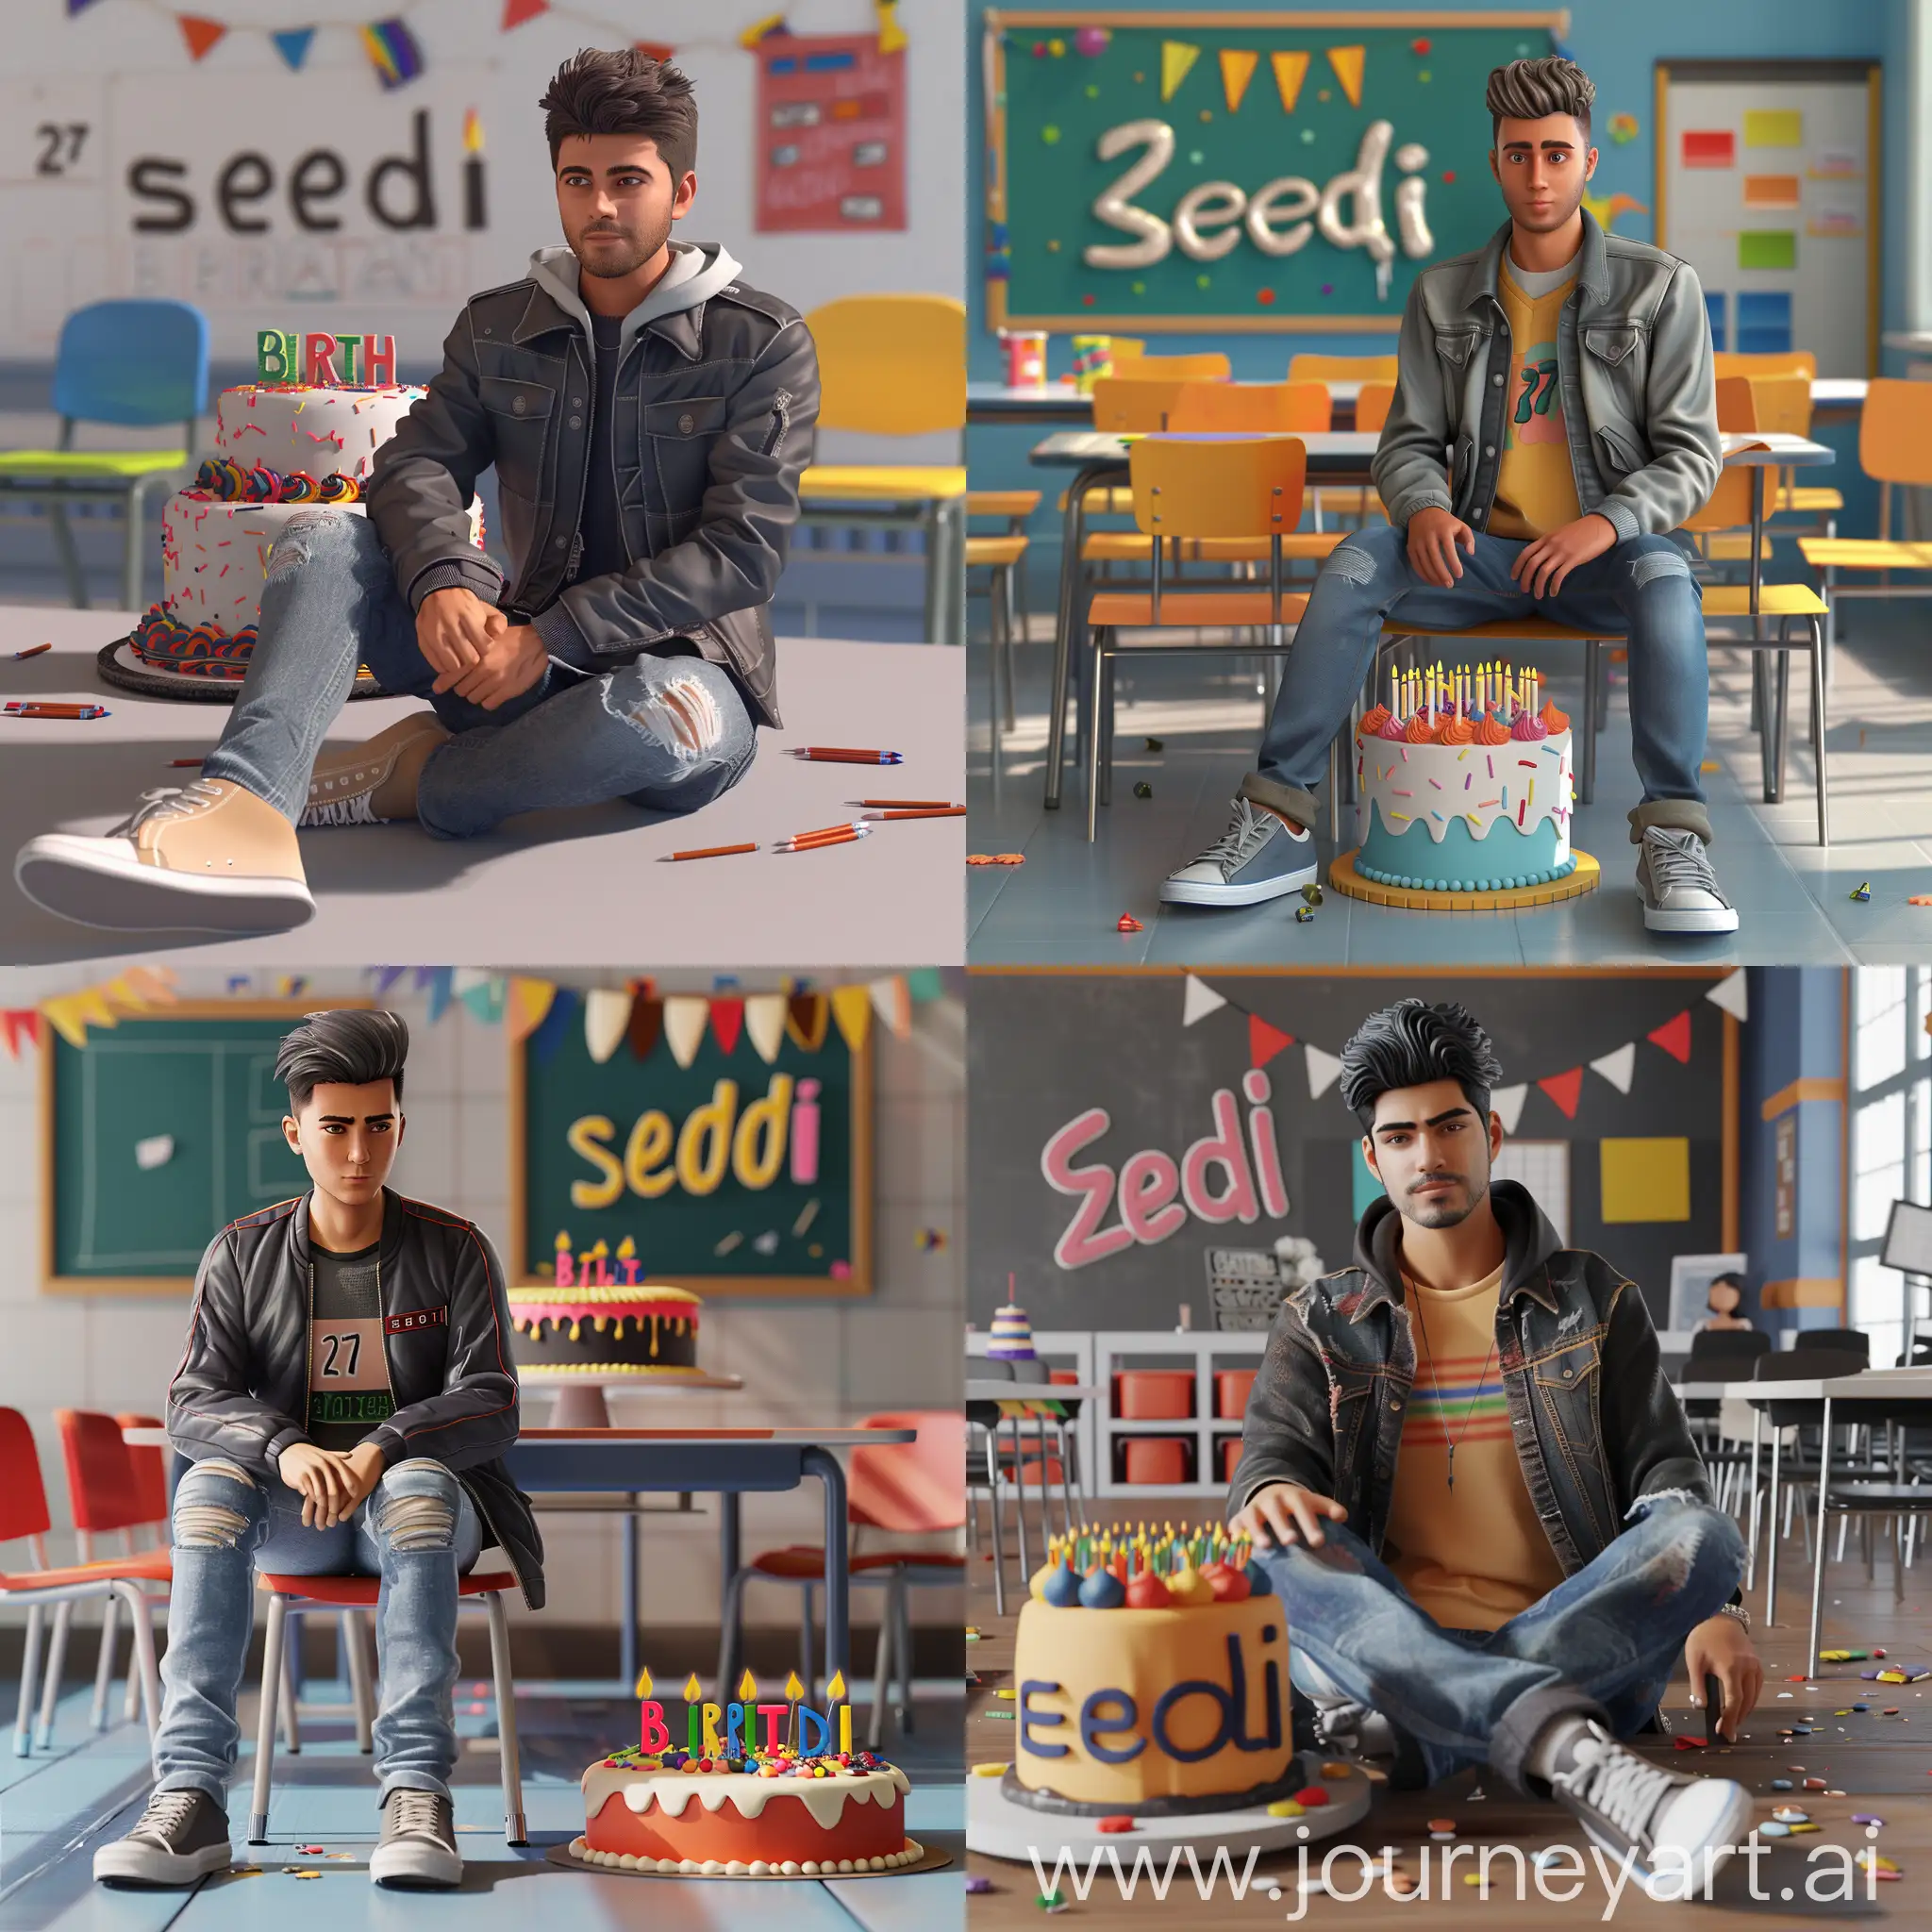 Young-Man-Celebrating-Birthday-in-Classroom-Setting-with-Casual-Attire